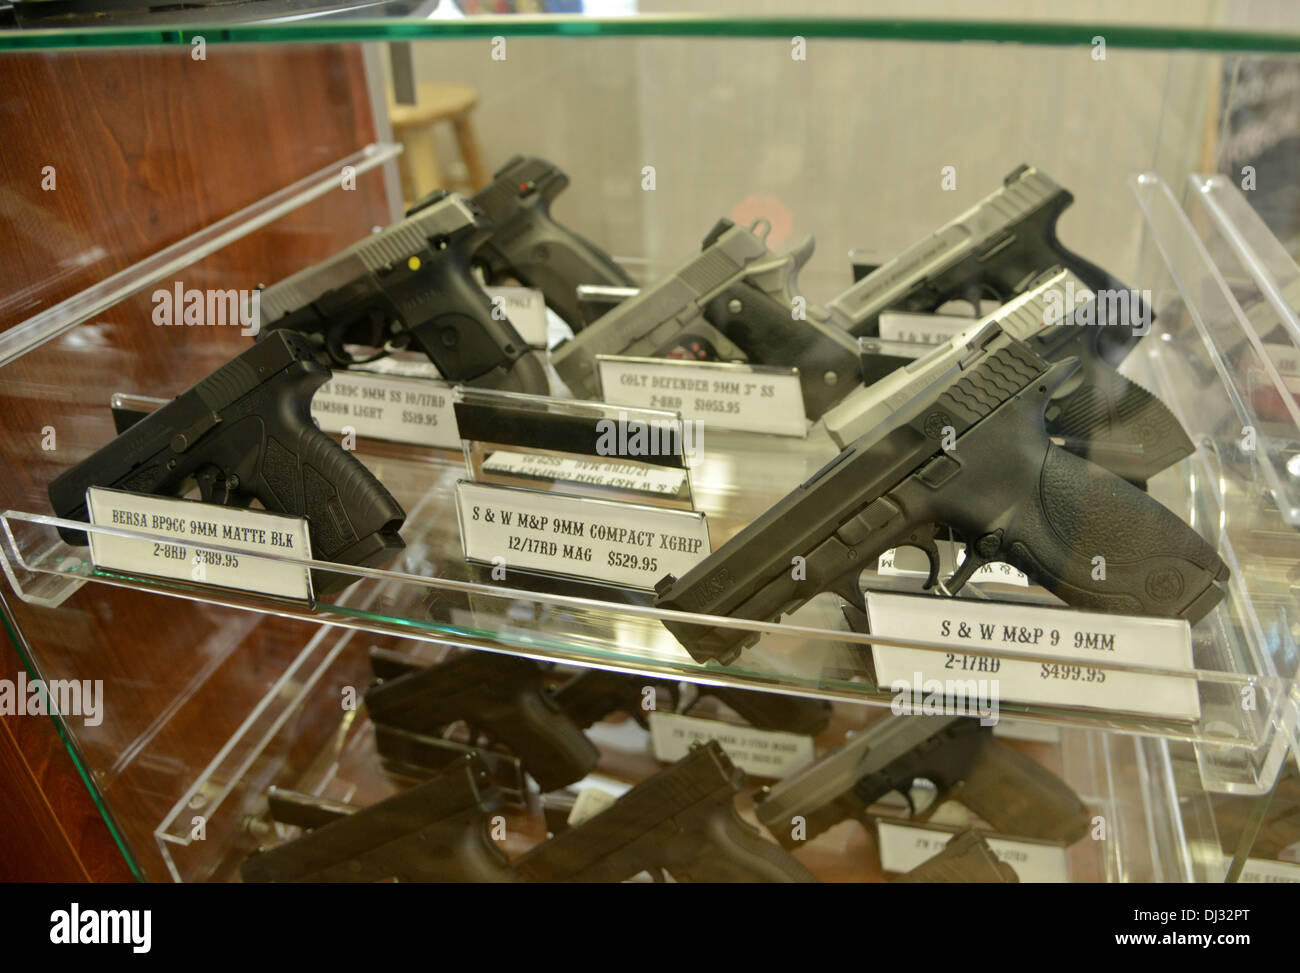 Hand guns on display in a store in small town middle America Stock Photo